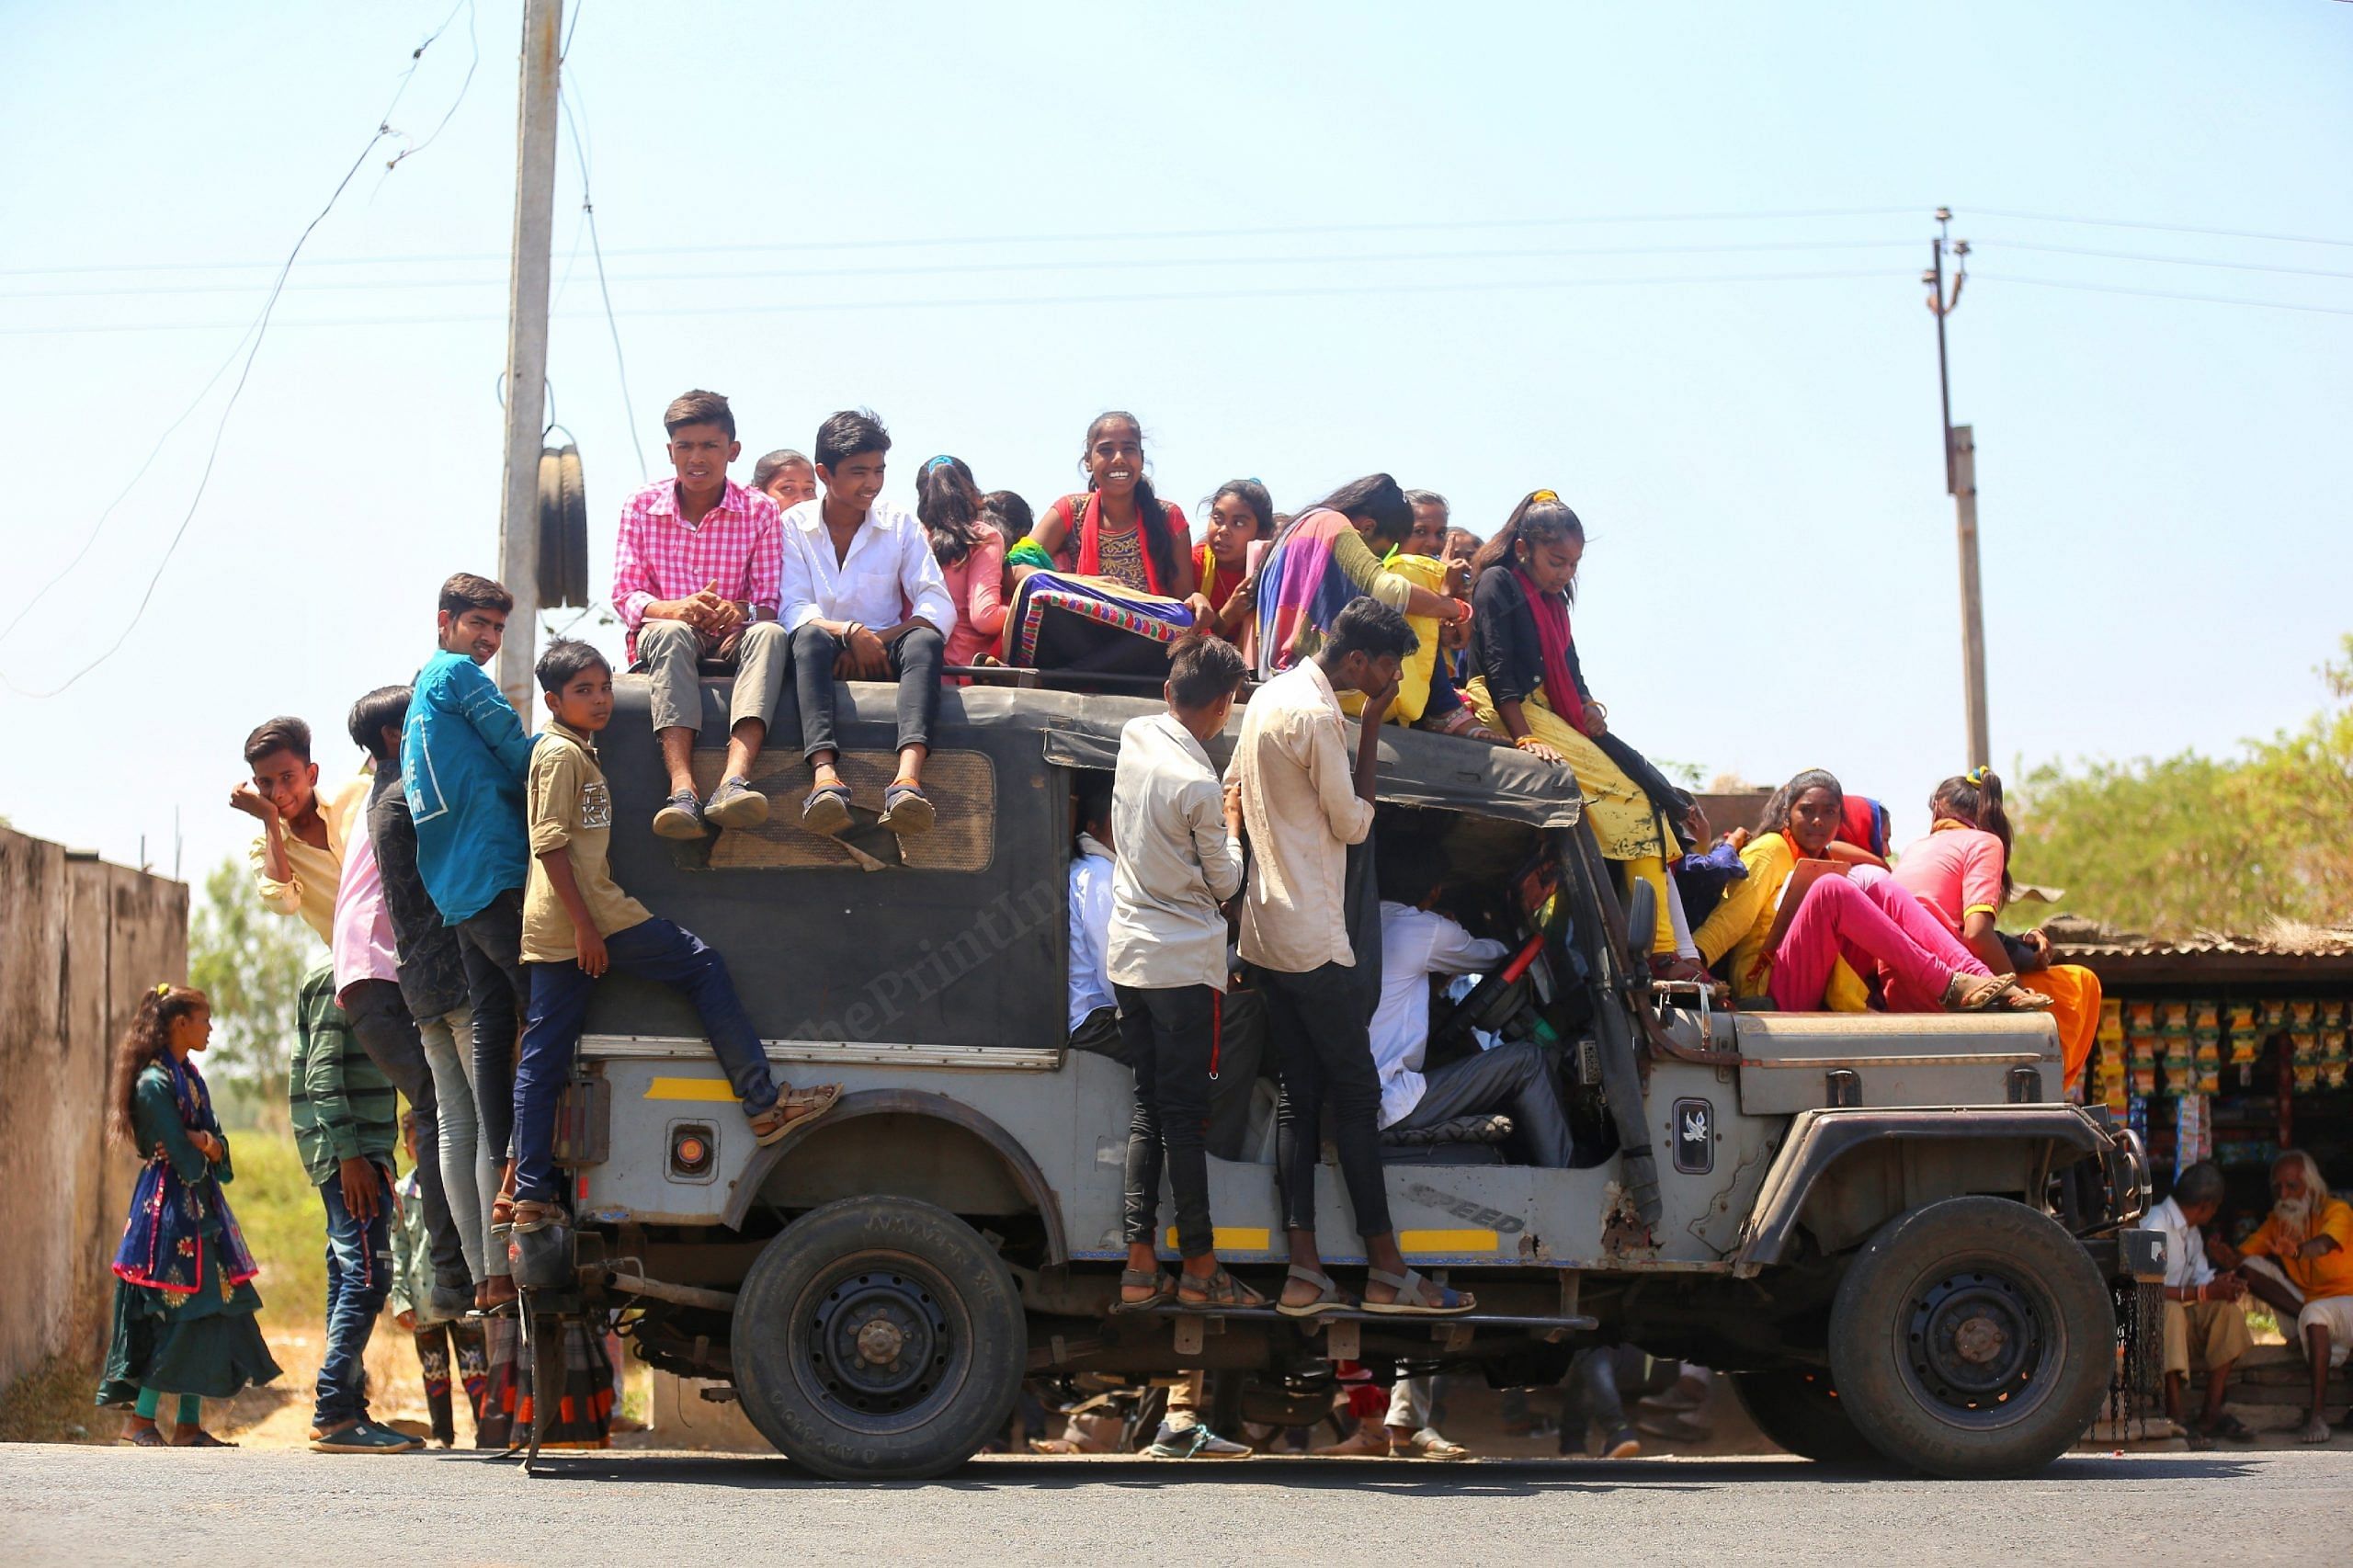 Students in Mahisagar district travel to school in an overcrowded public transport, paying five rupees for one way | Photo: Manisha Mondal |ThePrint